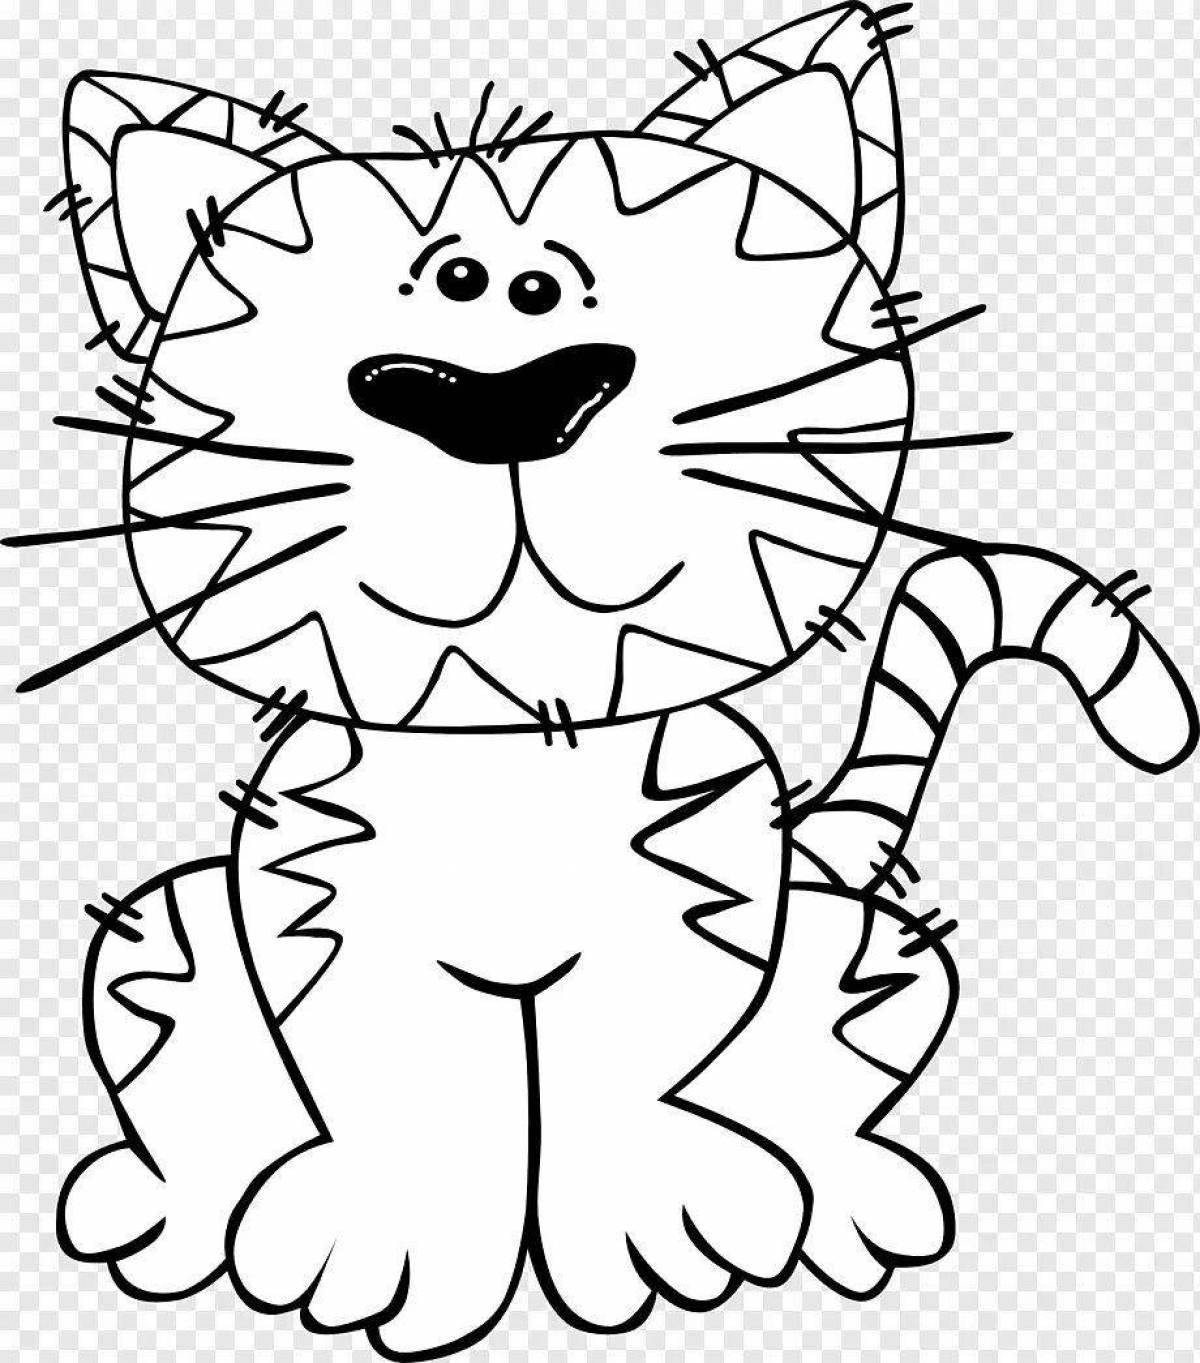 Coloring page graceful black and white cat